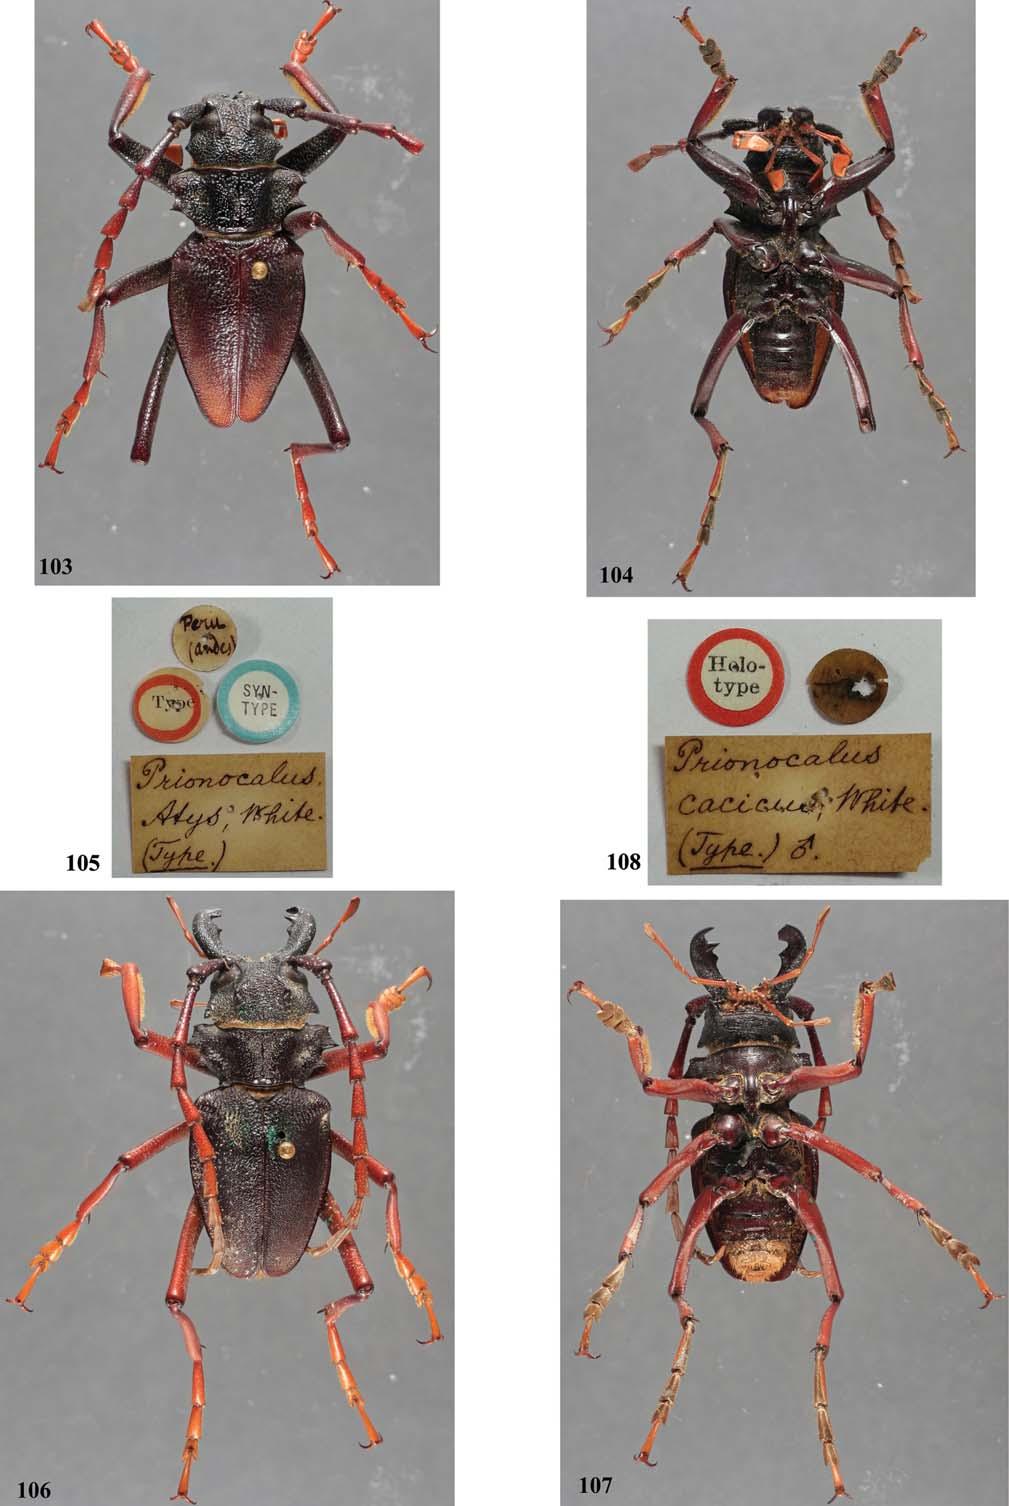 234 THE COLEOPTERISTS BULLETIN 67(3), 2013 Figs. 103 108. Prionacalus species. 103) P. atys, holotype male, dorsal view; 104) P.